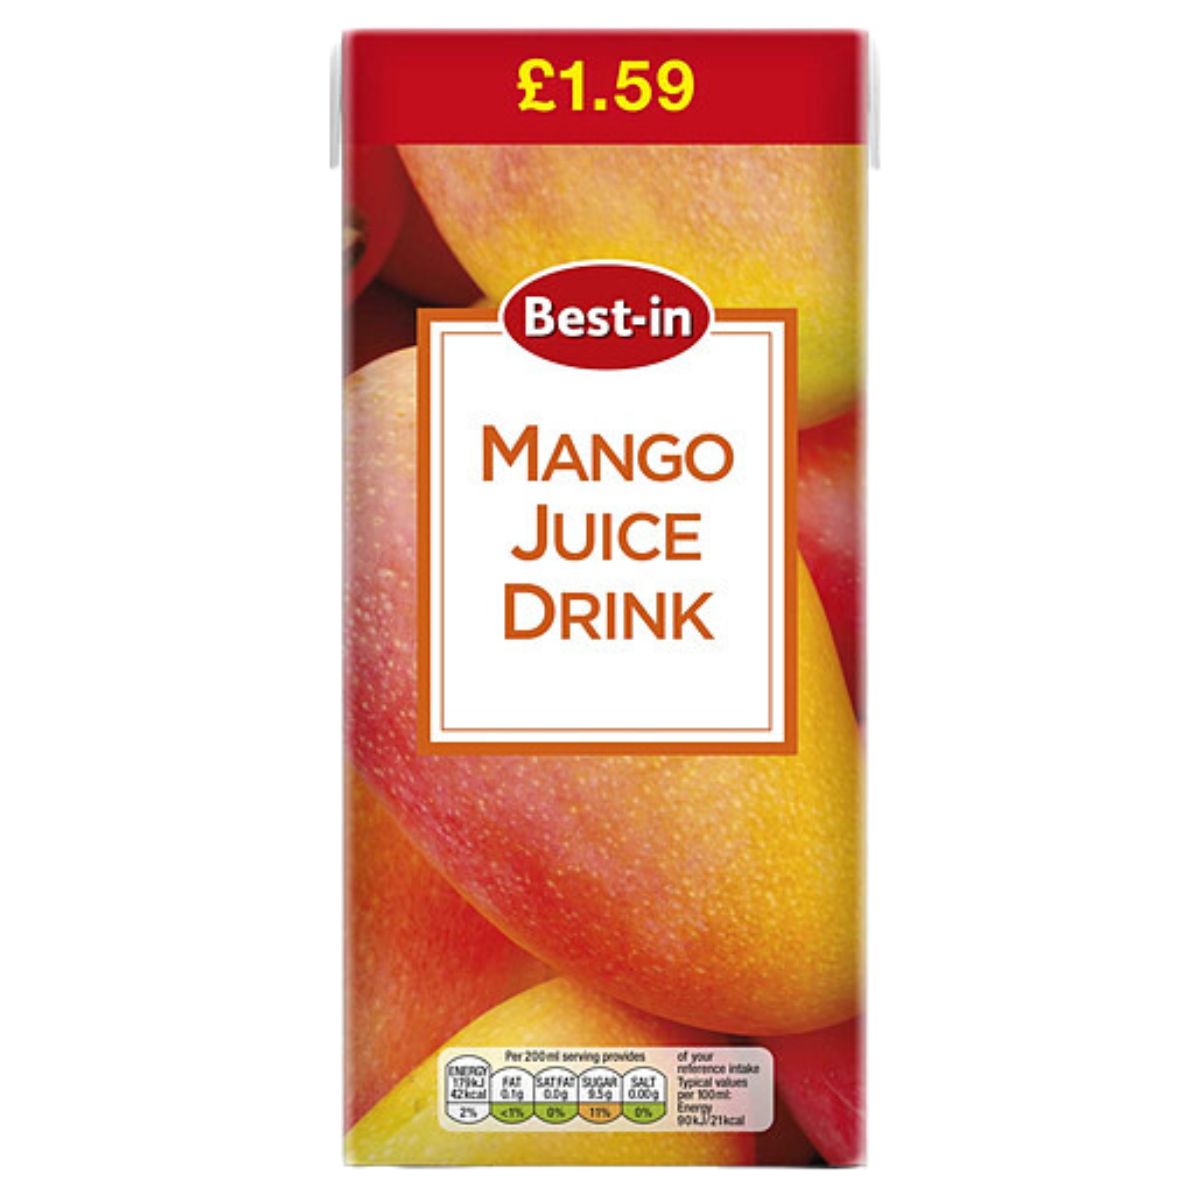 A pack of Best In Mango Juice Drink - 1L on a white background.